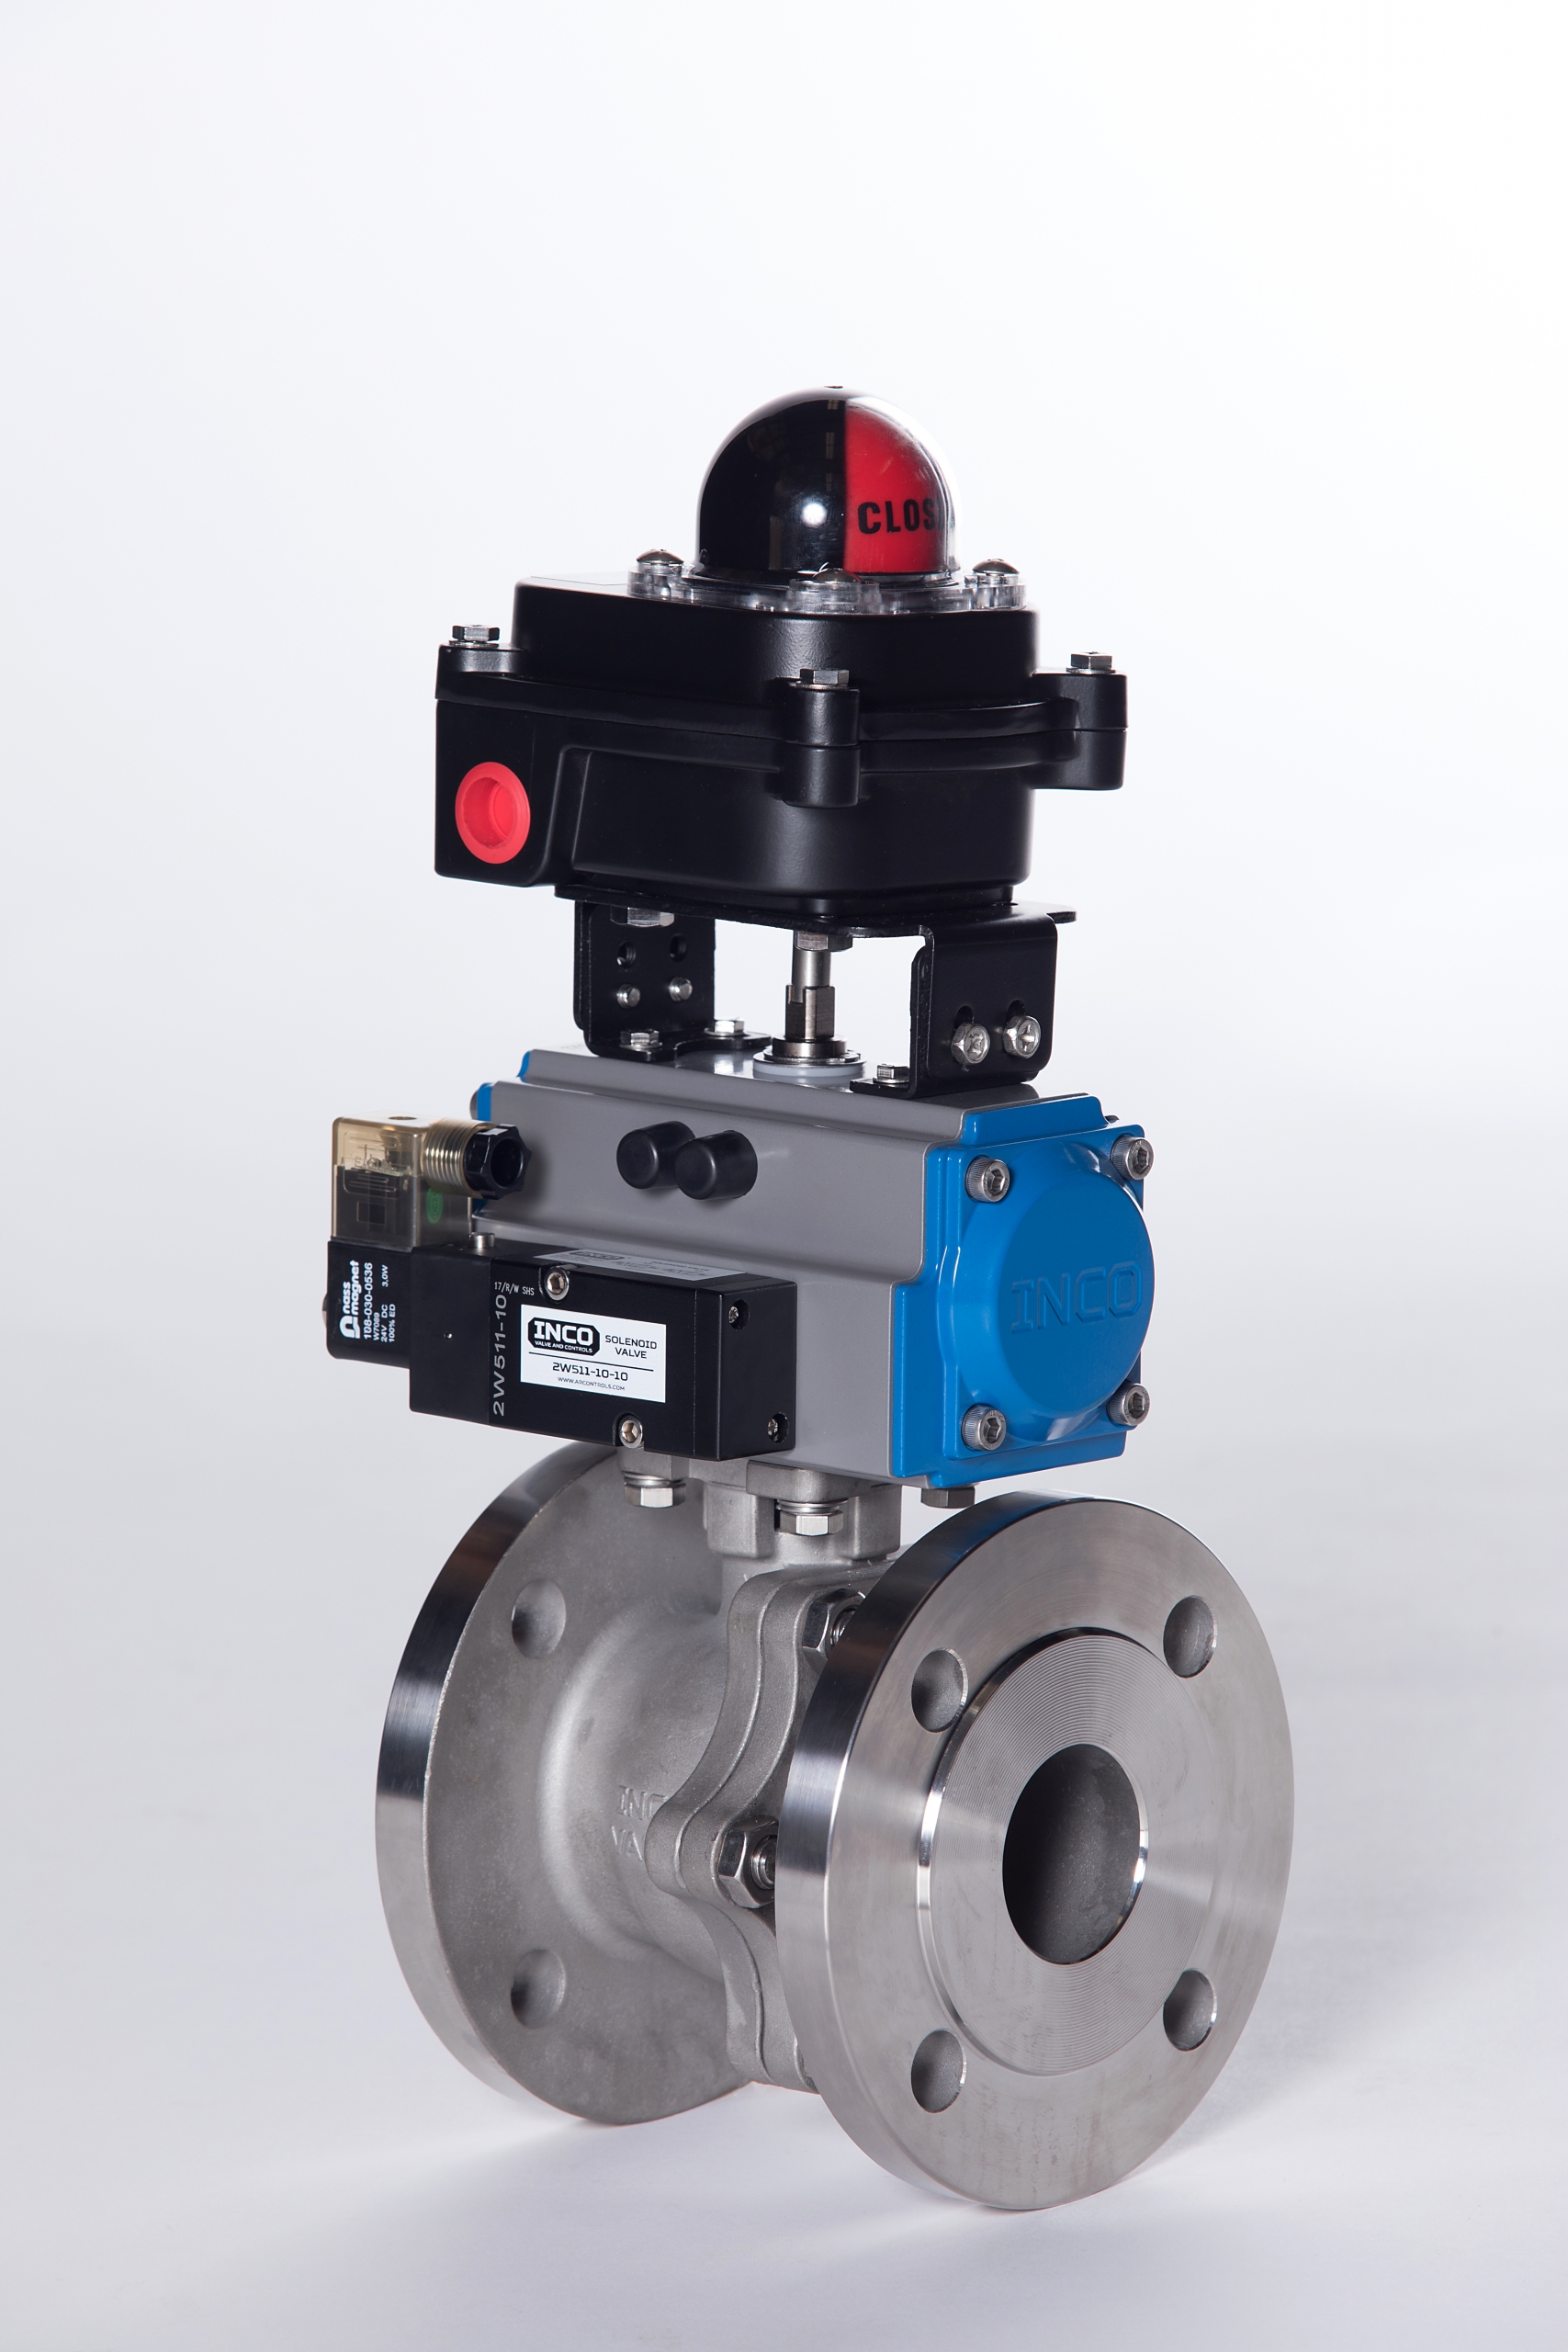 Inco Valve Series F16 and F40